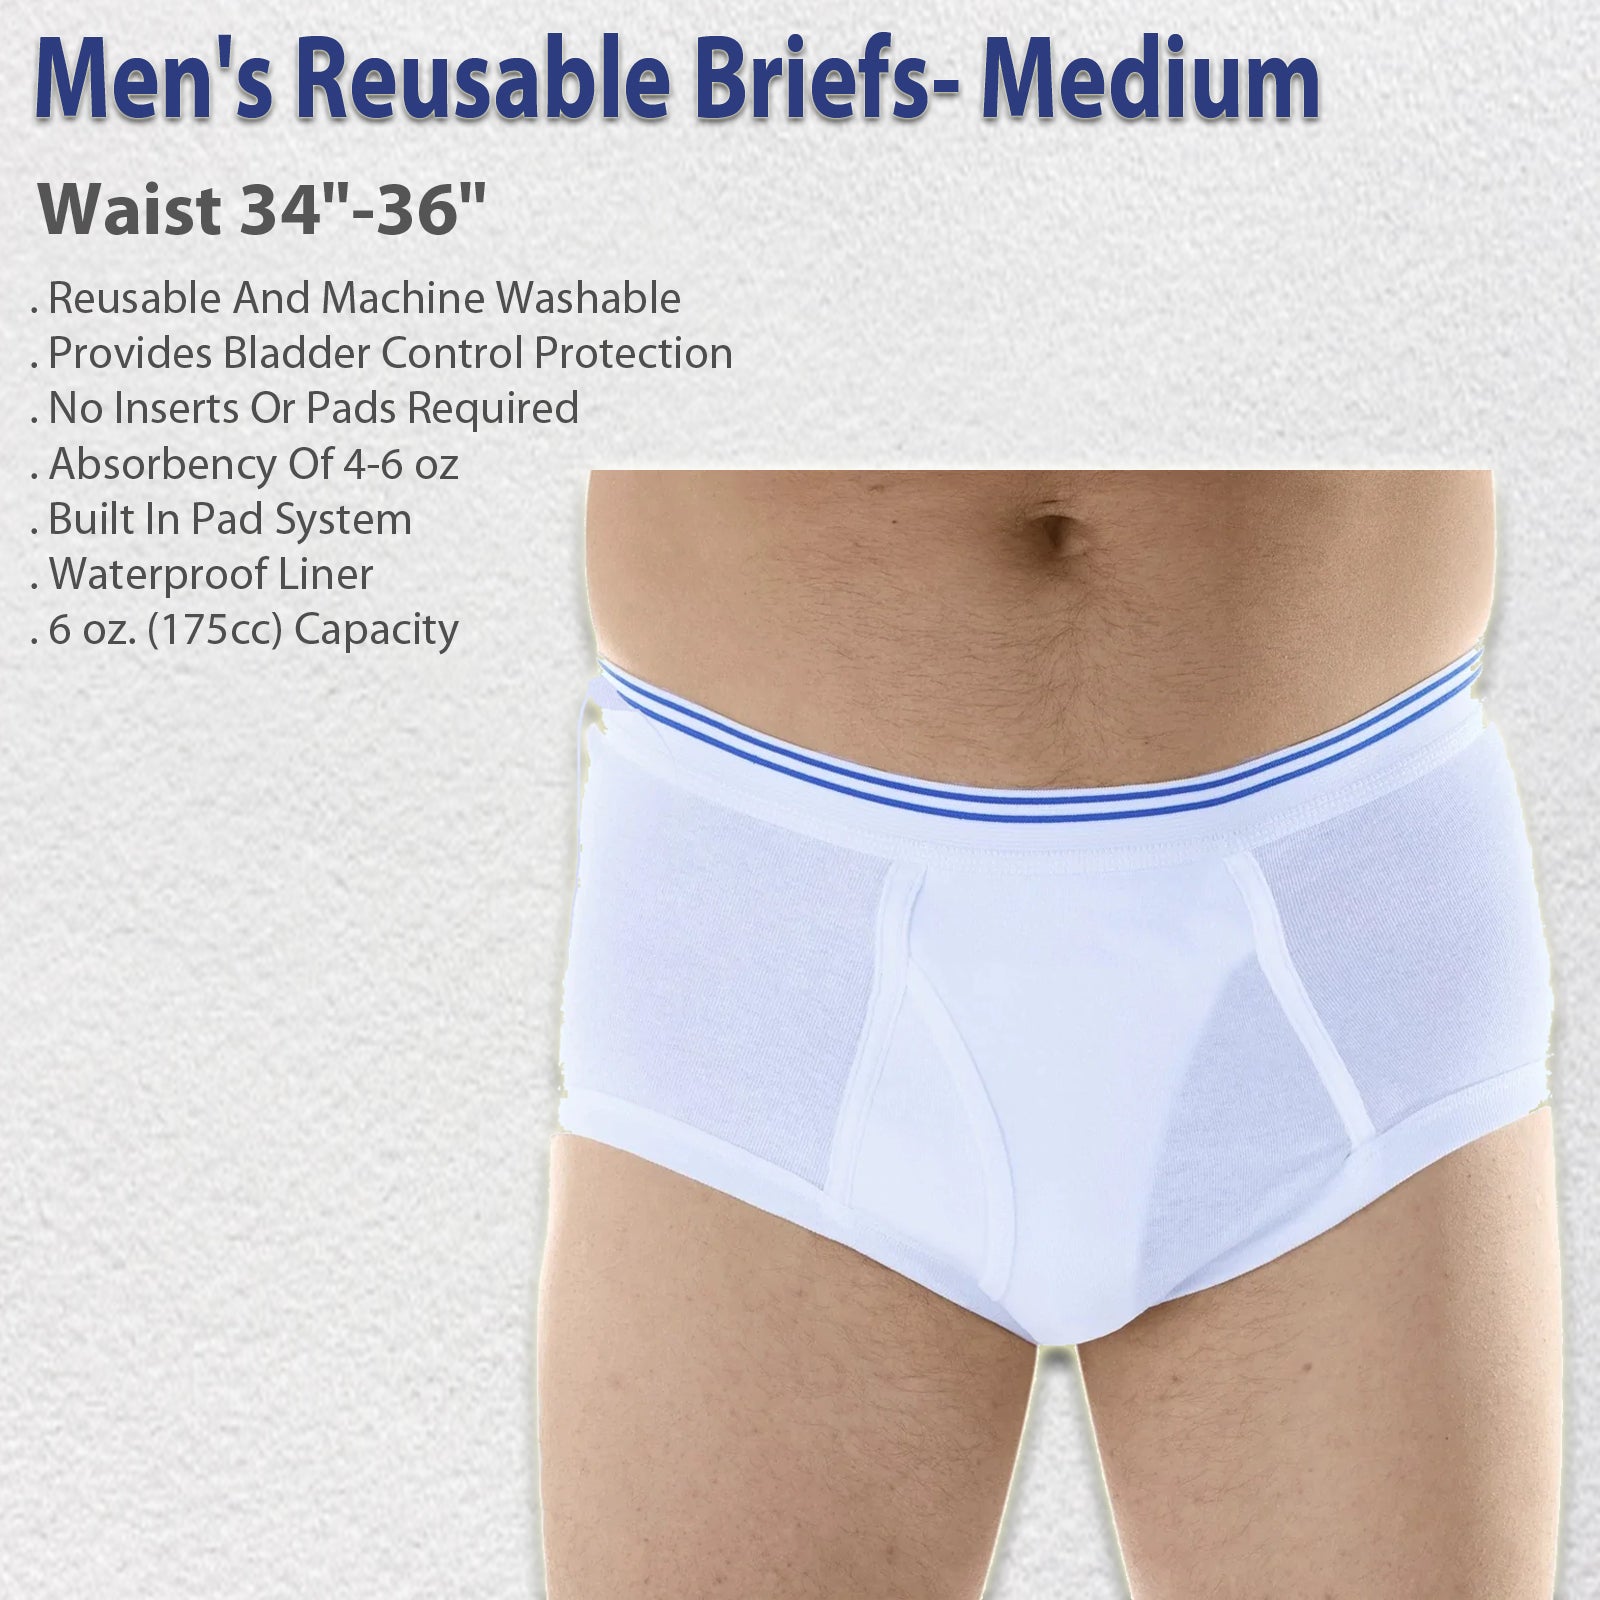 Cotton Ladies Brief Super Absorbency with Waterproof Backing-White